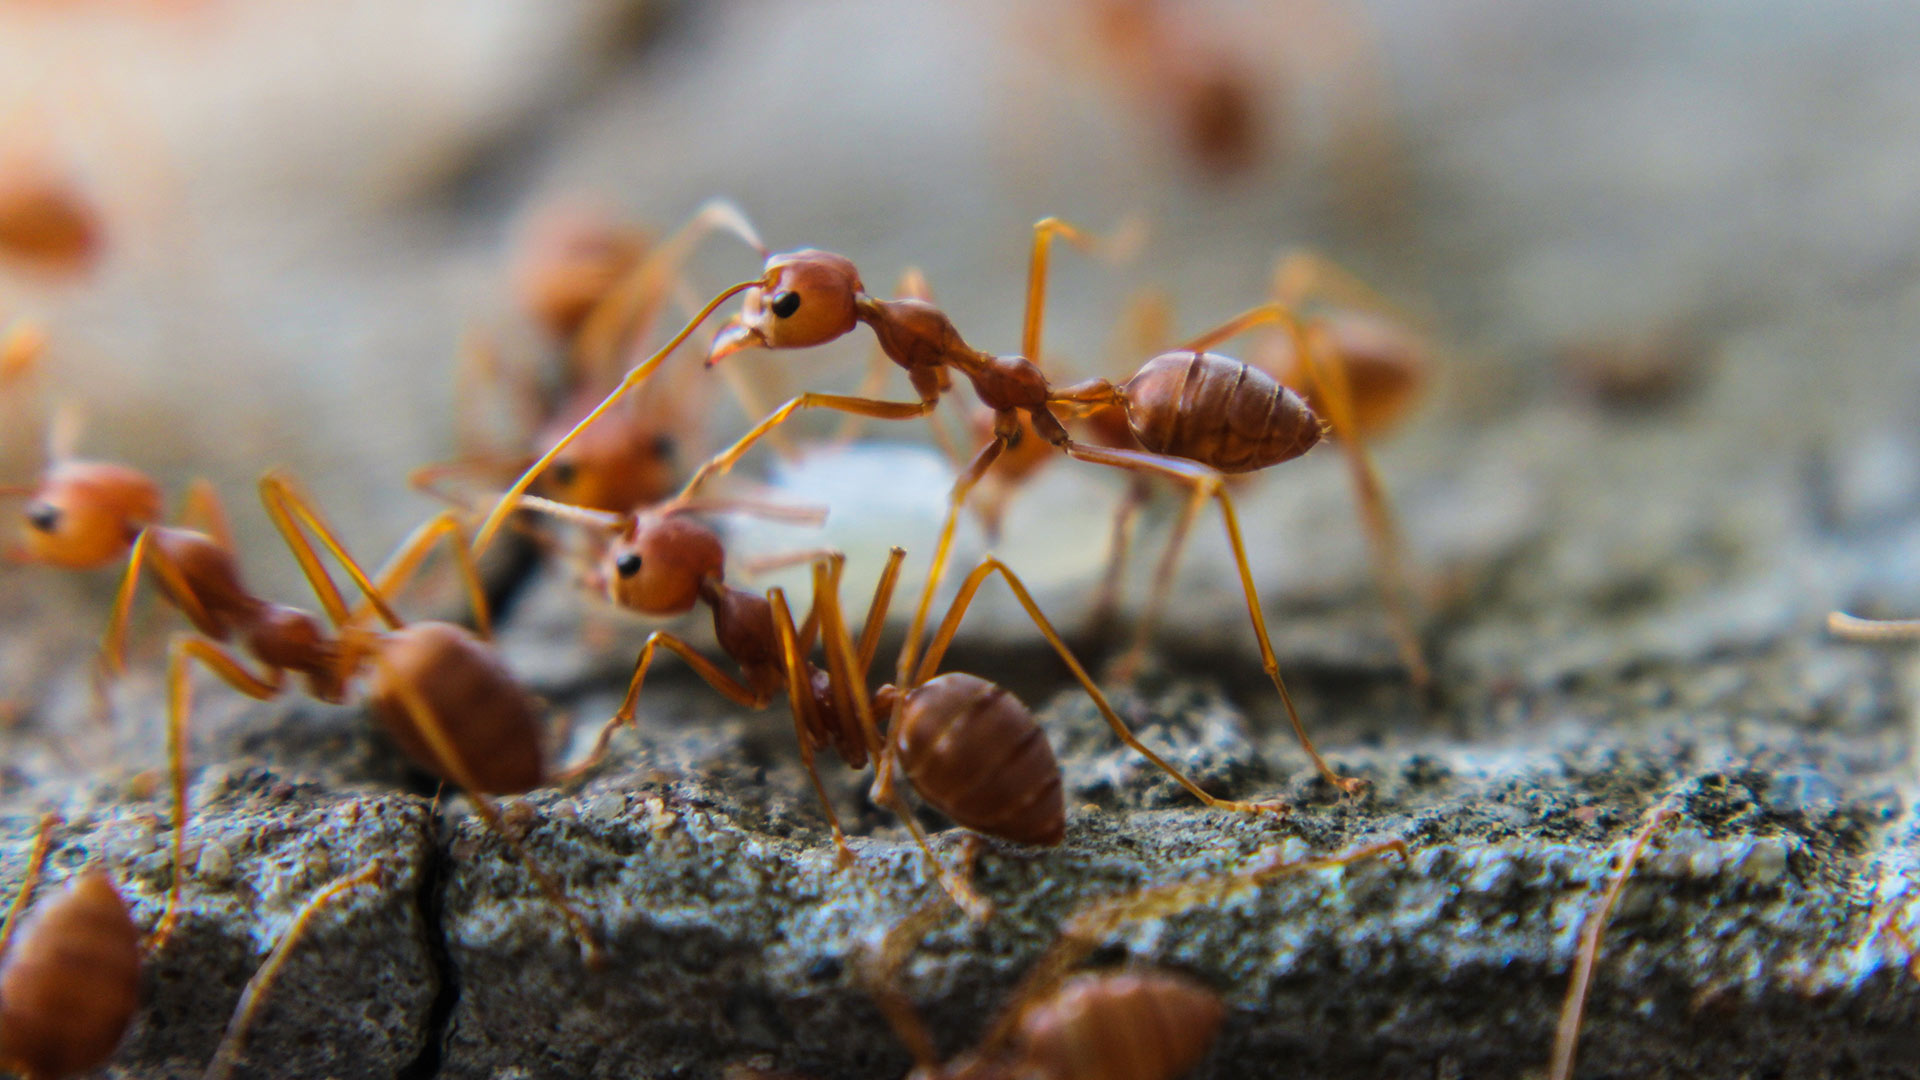 Are Fire Ants on Your Property? Here’s 3 Things You Should Do